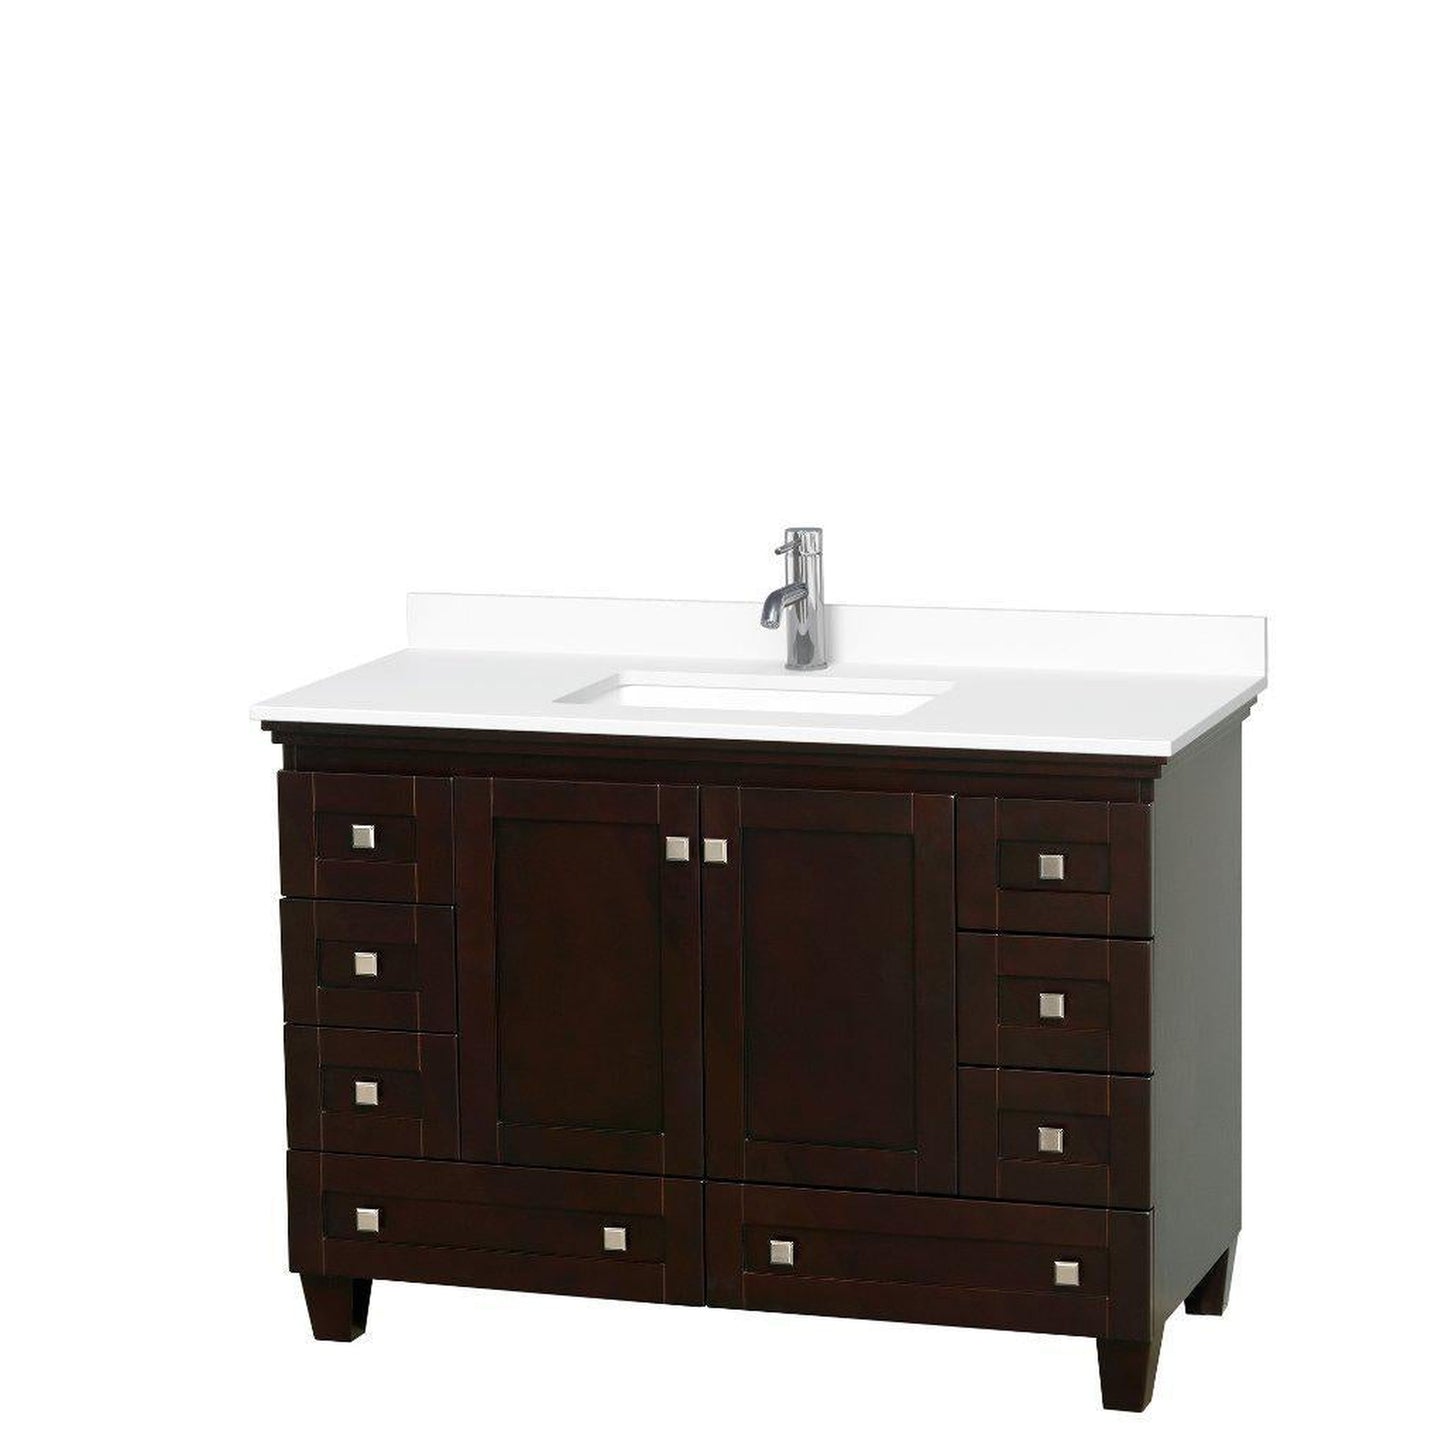 Wyndham Collection Acclaim 48" Single Bathroom Espresso Vanity With White Cultured Marble Countertop And Undermount Square Sink